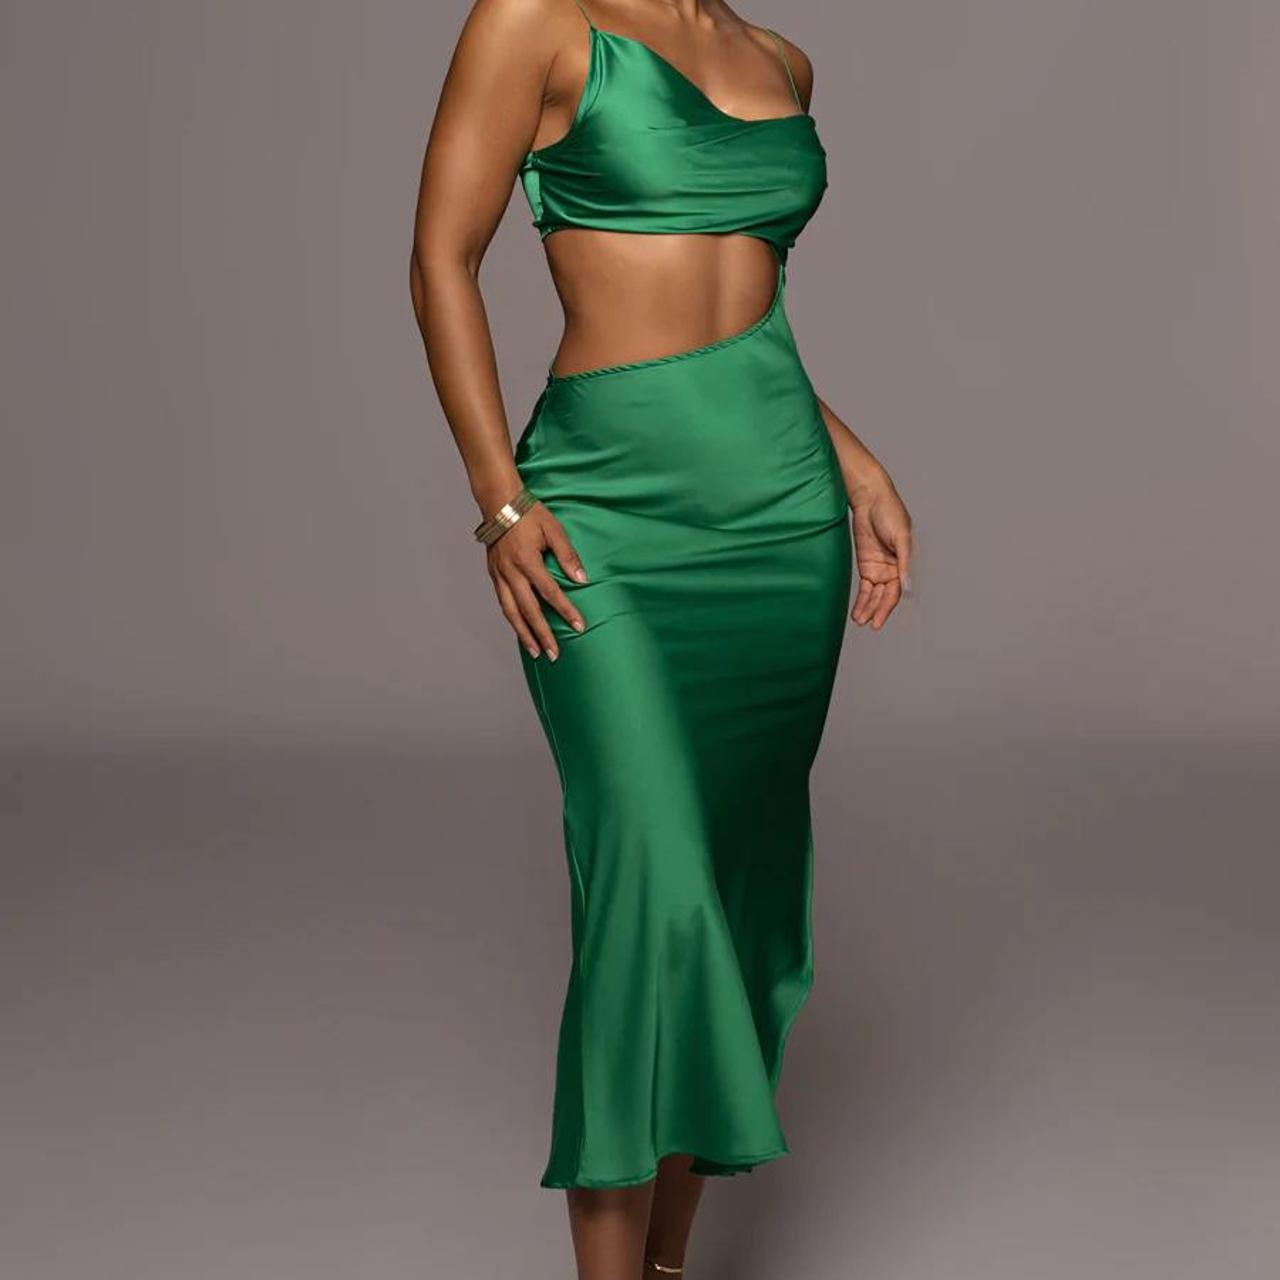 Parrot Green The Layered Gown by RIB for rent online | FLYROBE